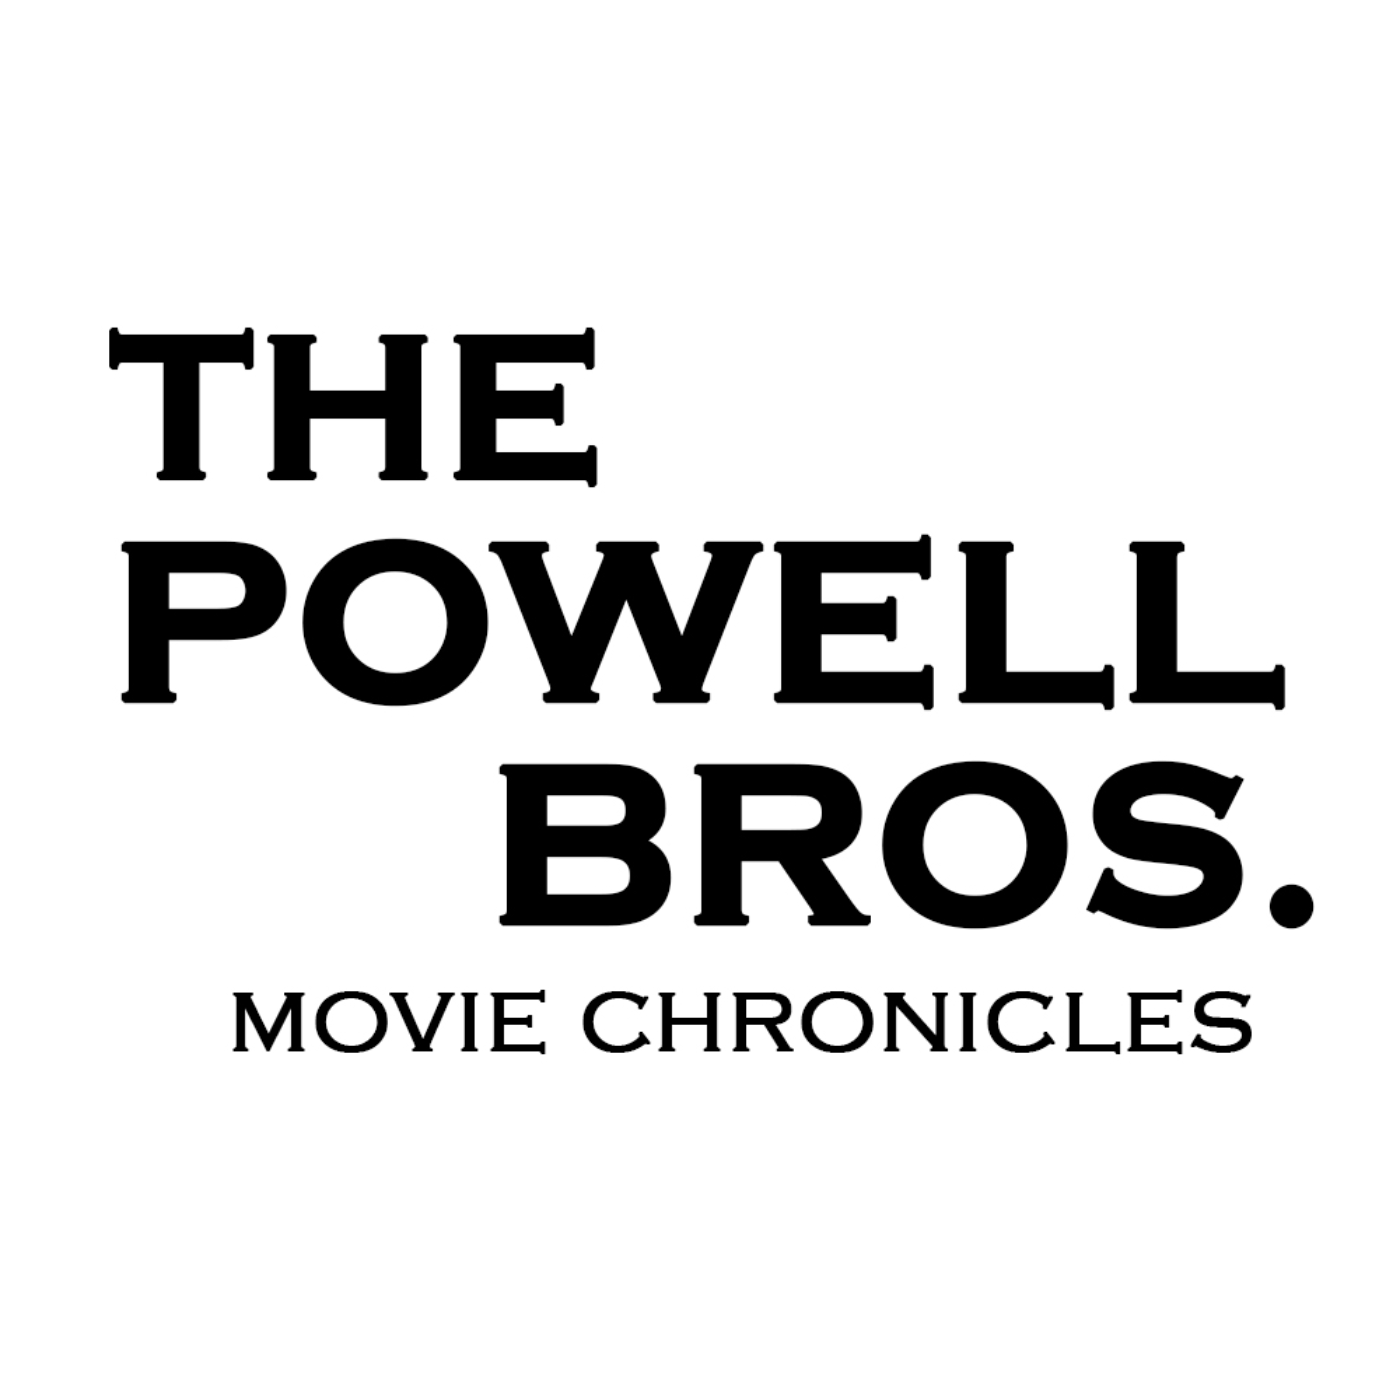 Movie Chronicles w/ The Powell Bros.